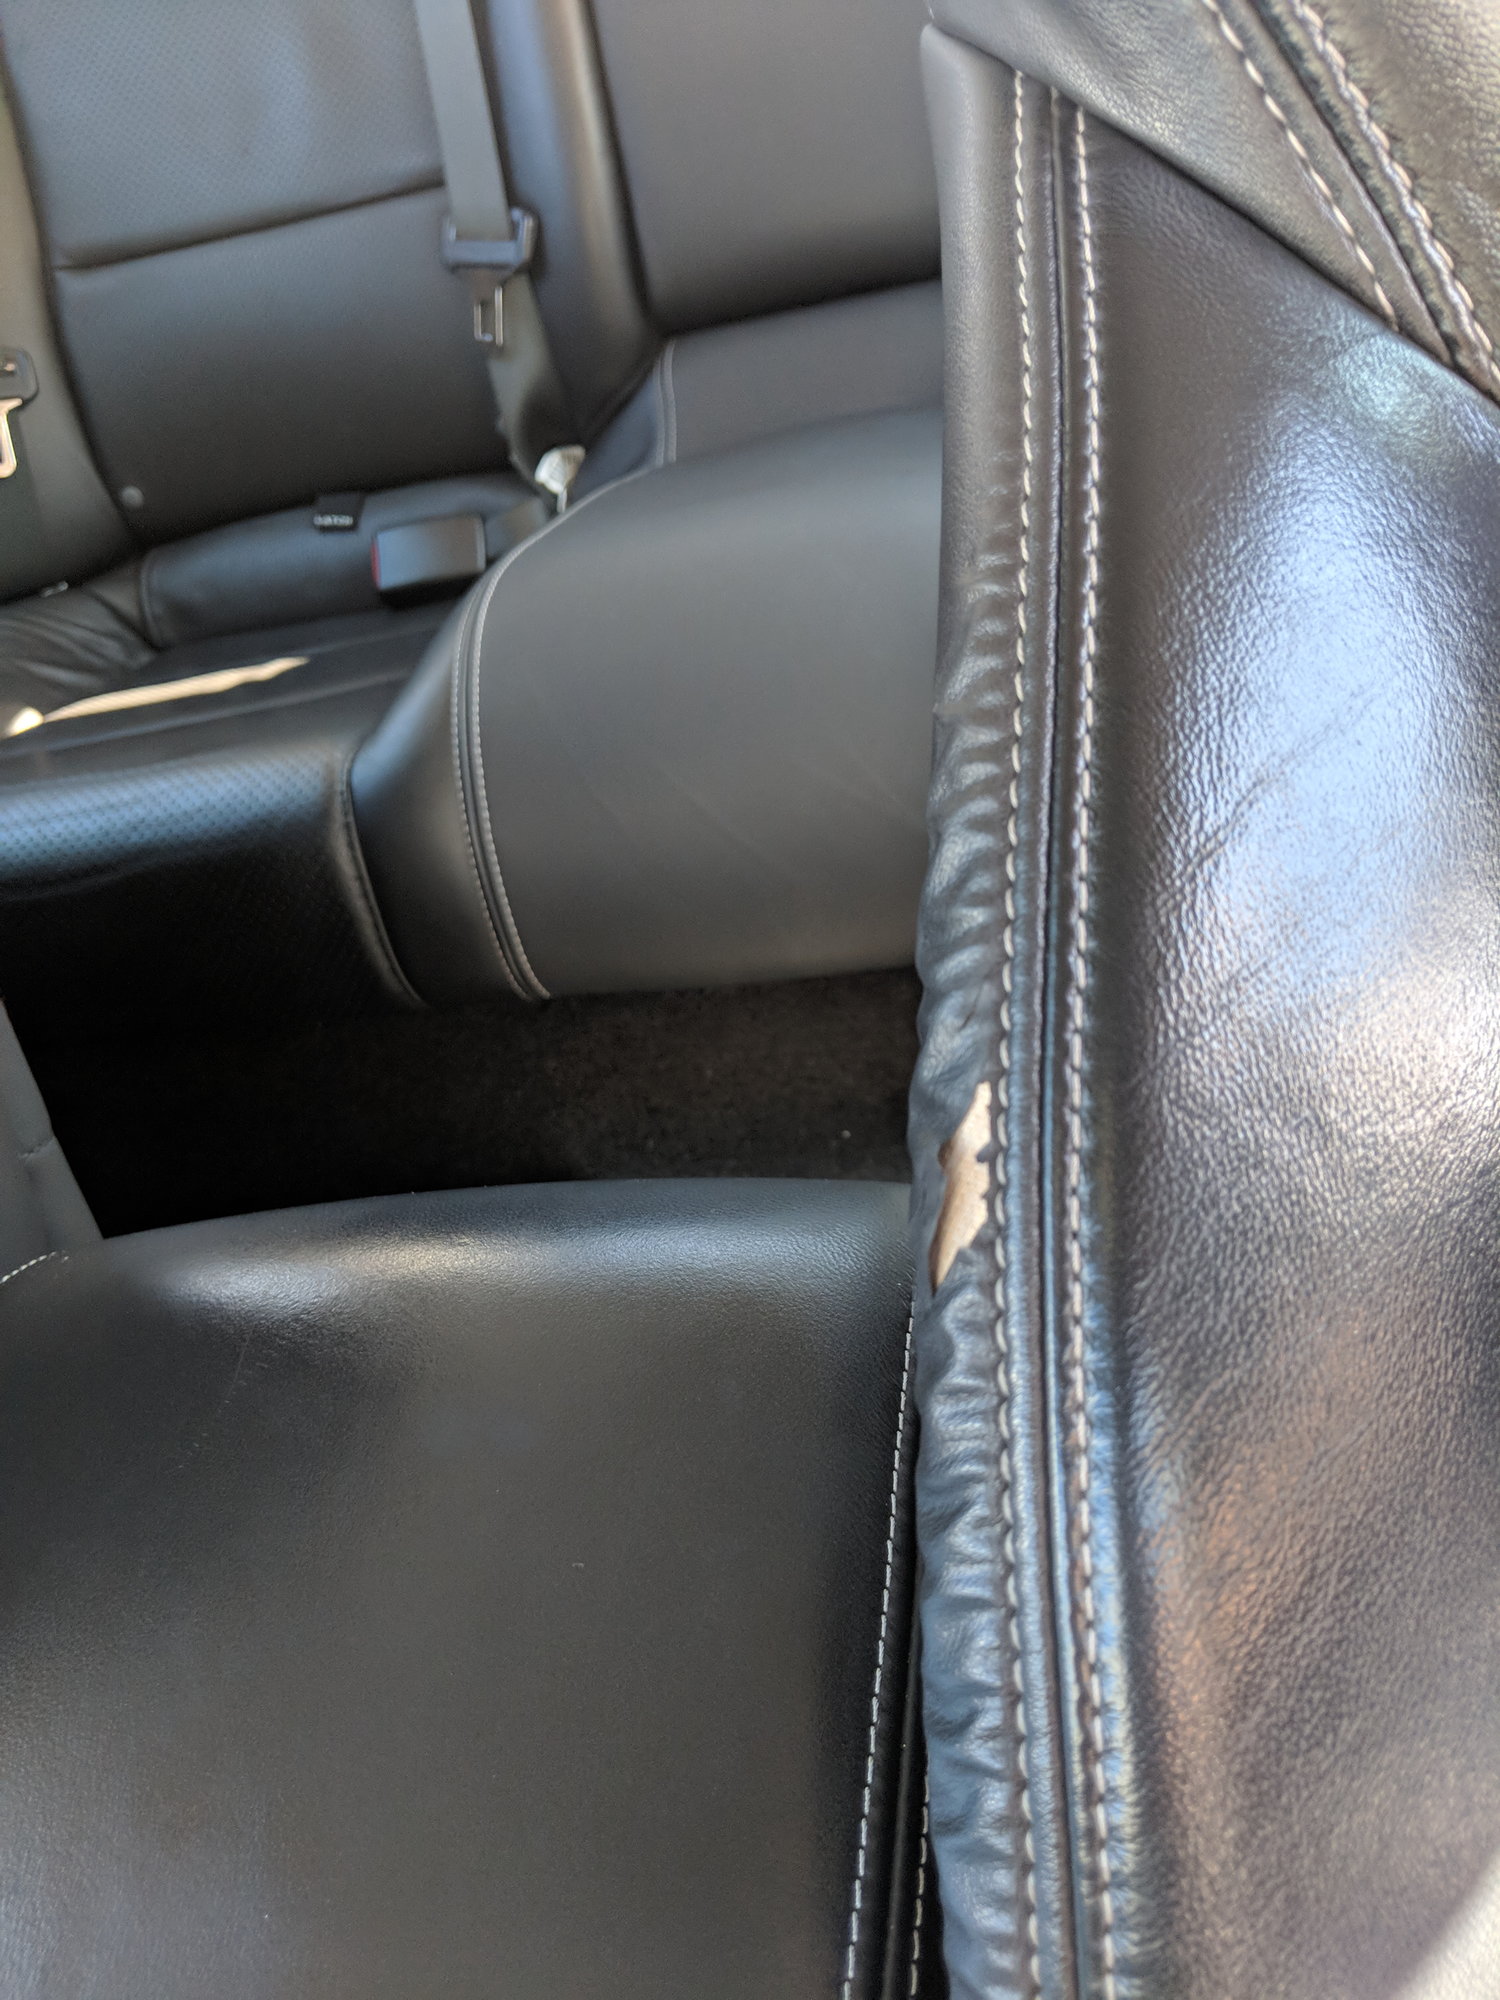 Driver seat leather tear- Replace seat cover - AcuraZine - Acura Enthusiast  Community